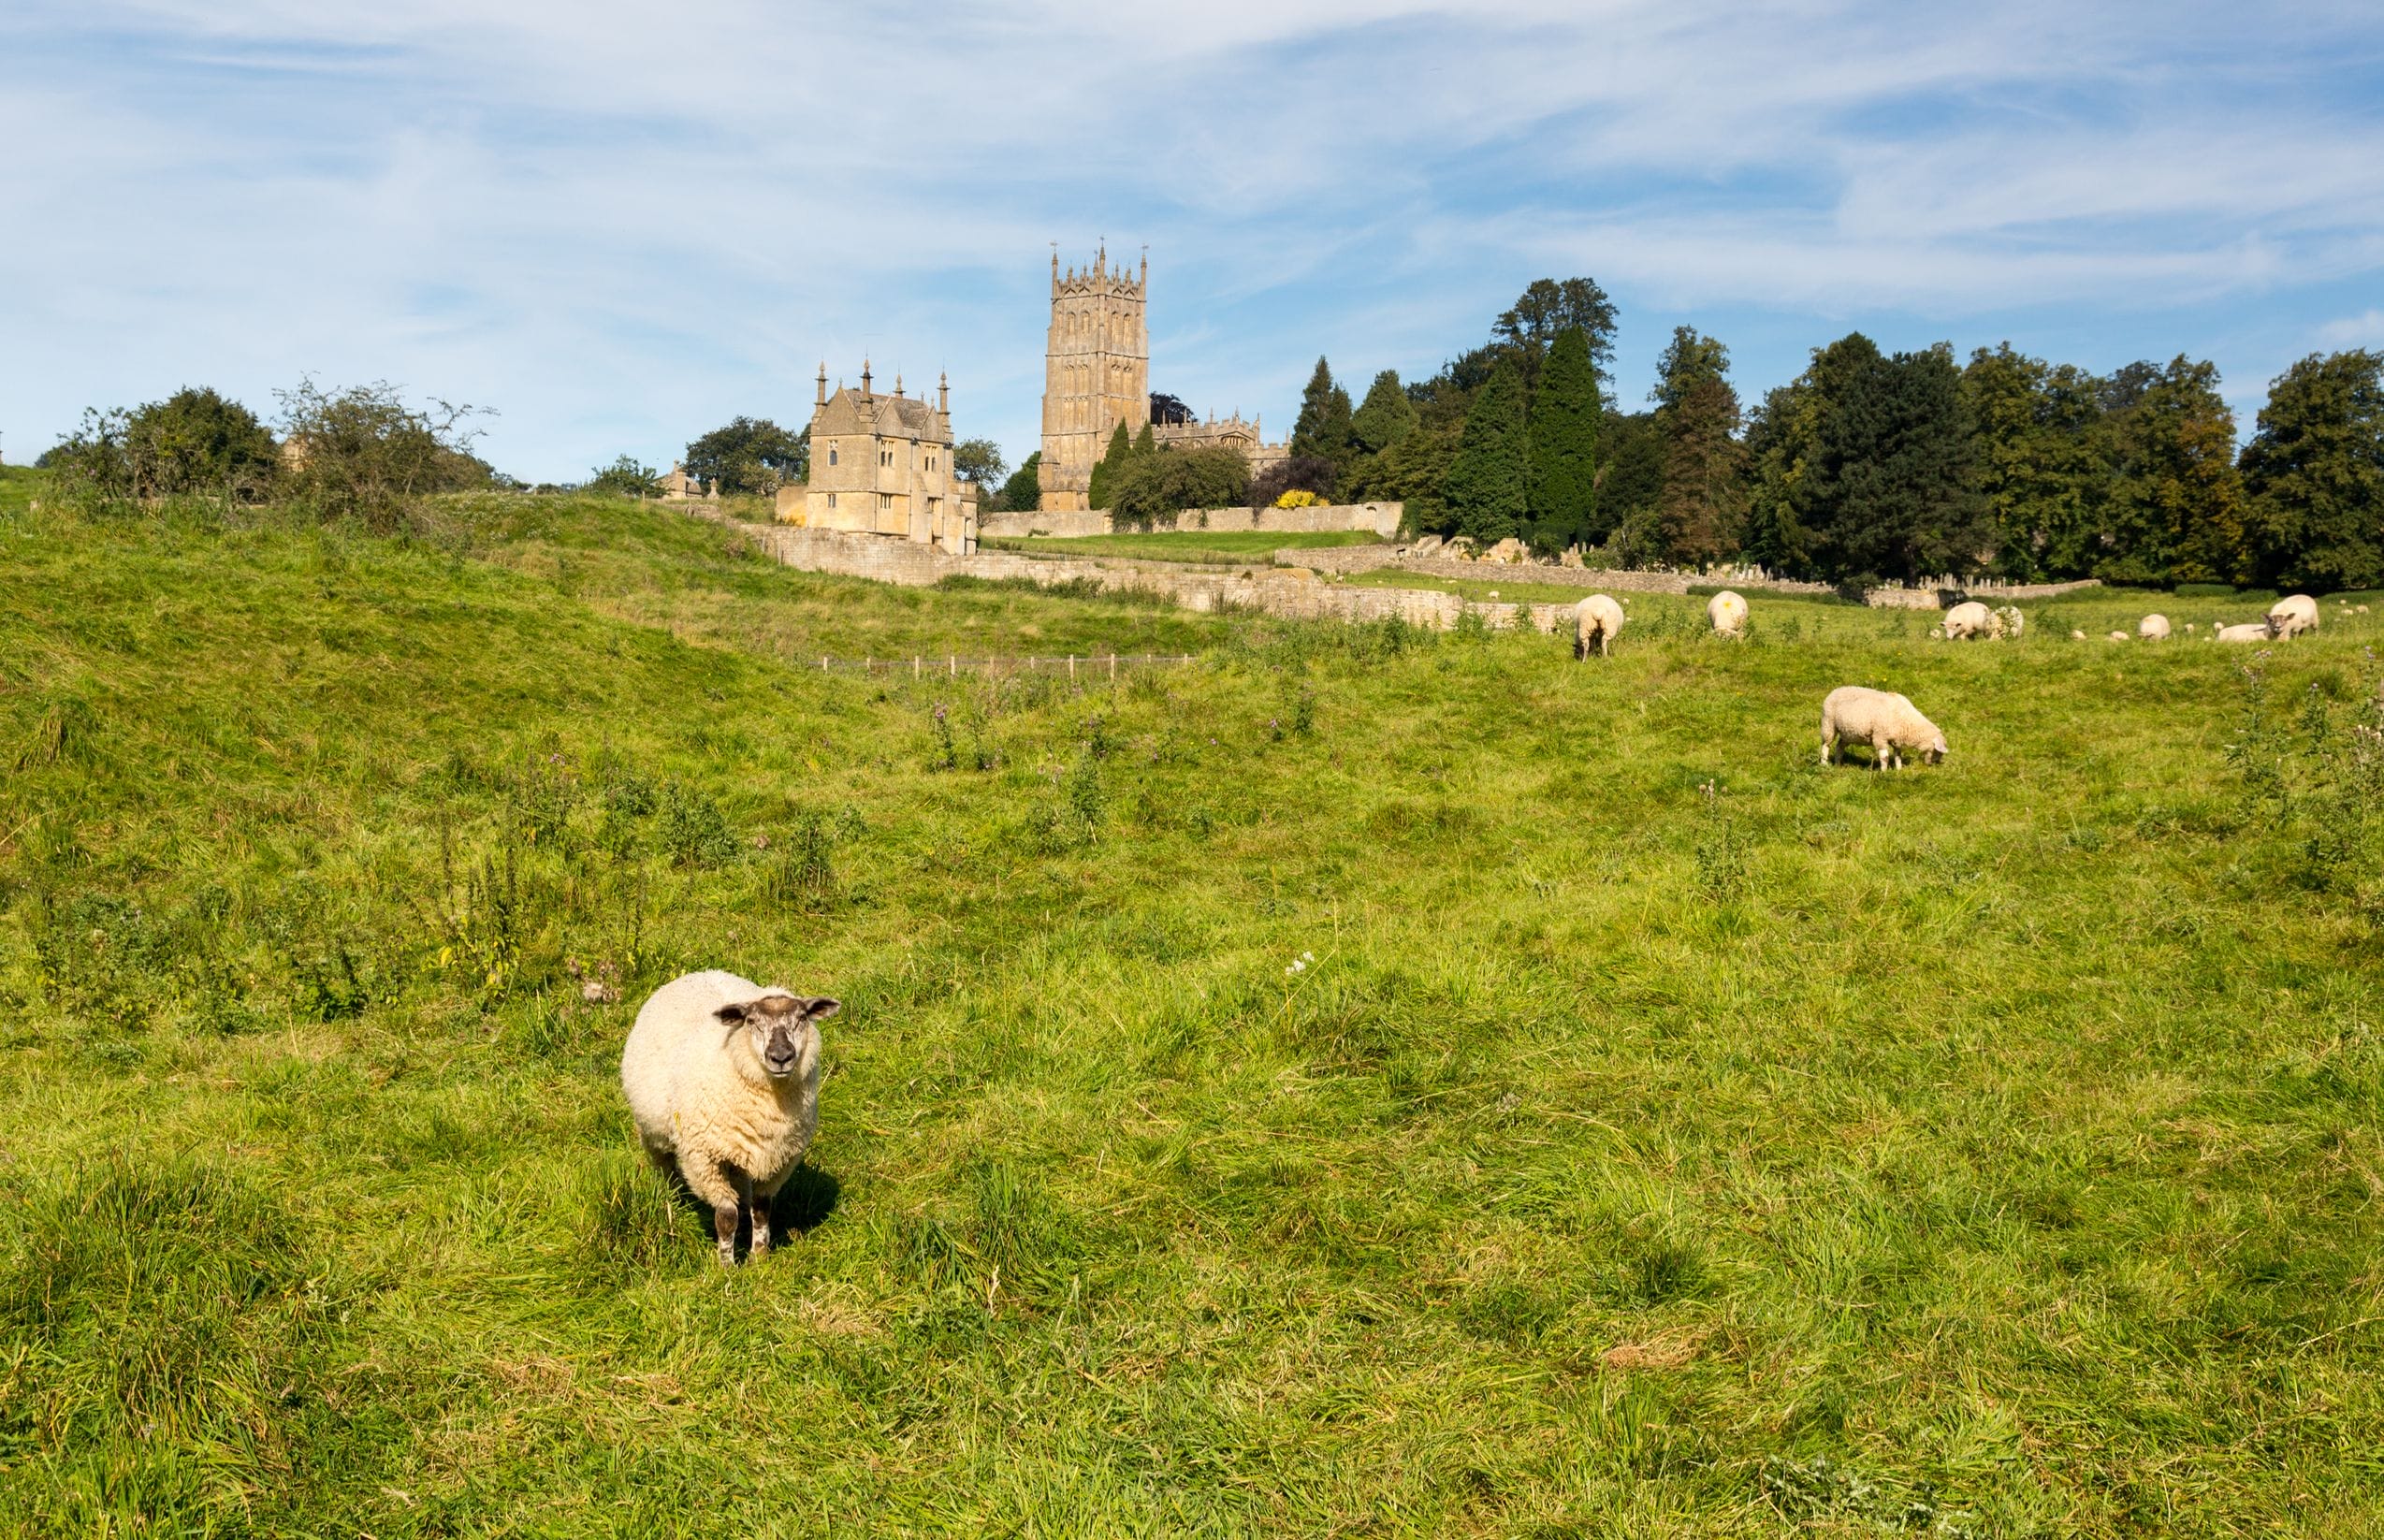 st james church seen across meadow with sheep in old cotswold town of chipping campden